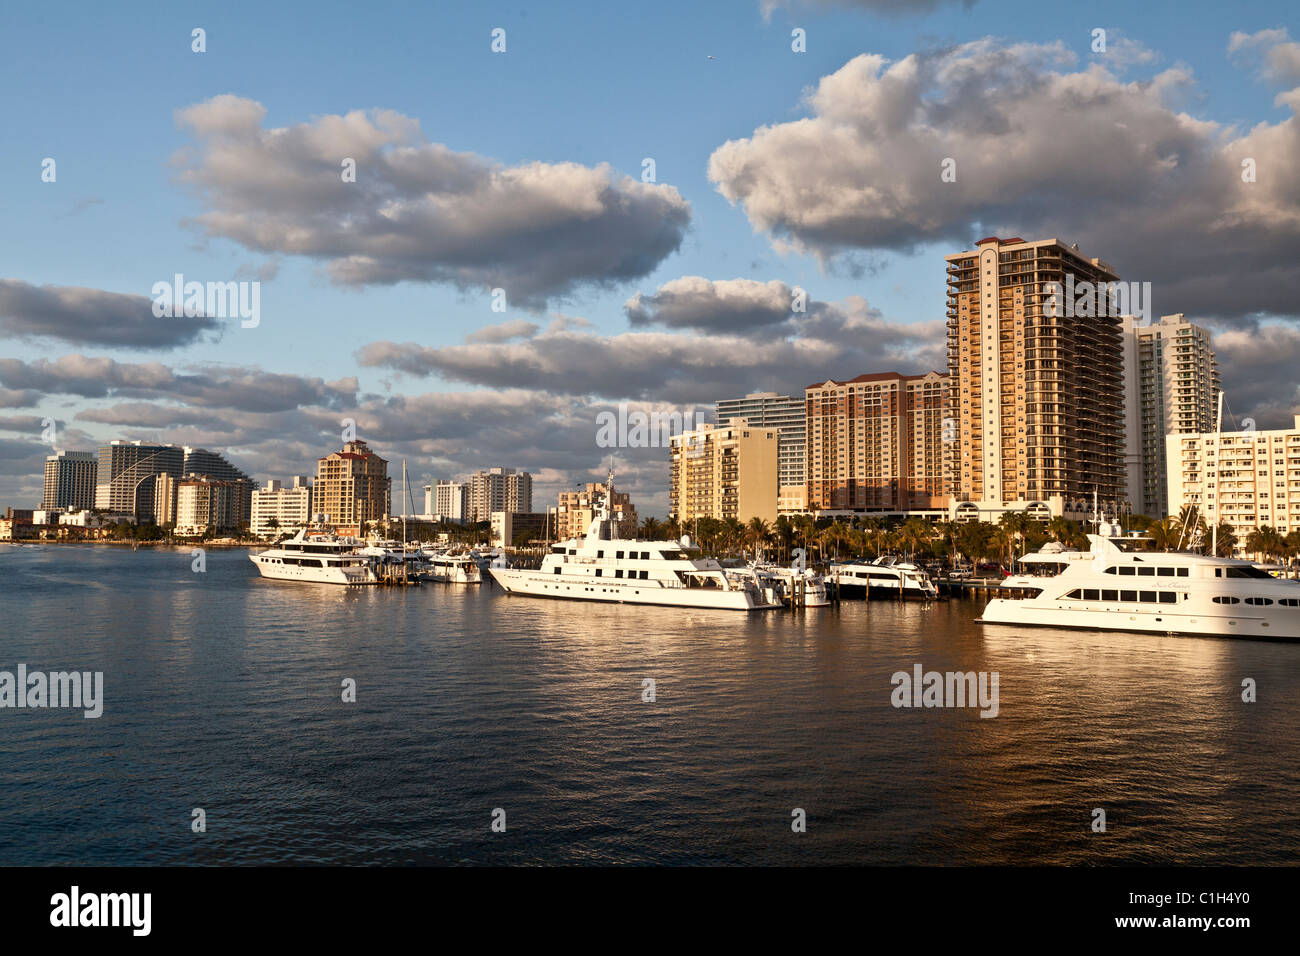 Luxury yachts docked in intercoastal waterway with Fort Lauderdale hotels in background. Stock Photo